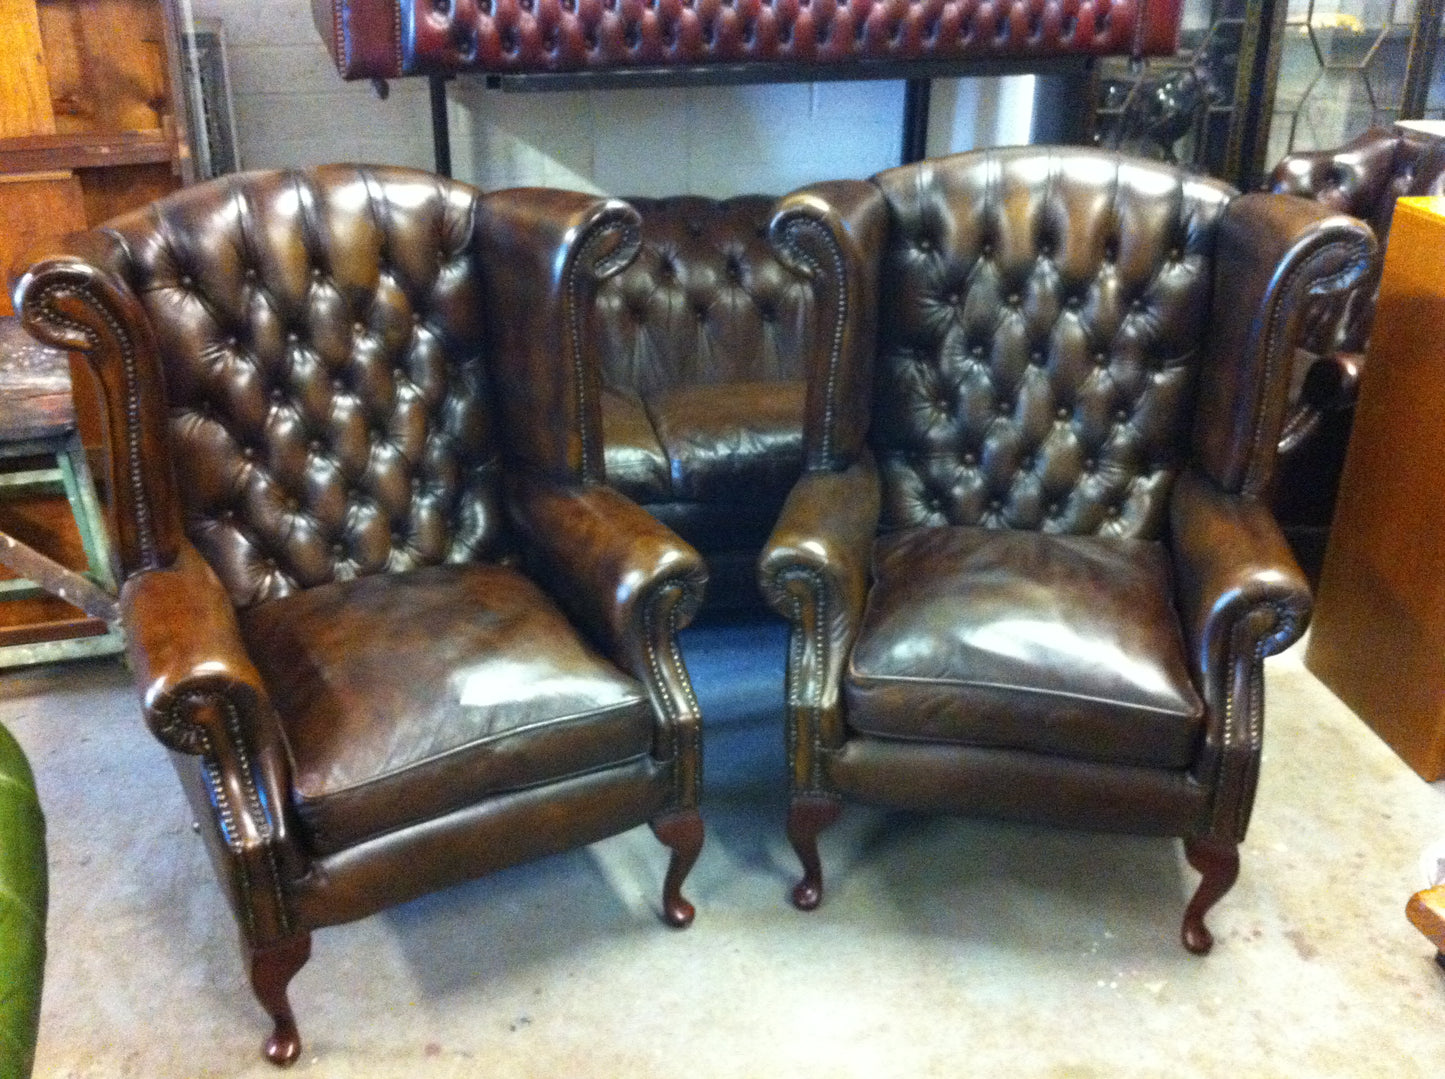 Gorgeous Pair Thomas Lloyd Hand Dyed "Antique" Brown Leather Chesterfield Chairs SOLD